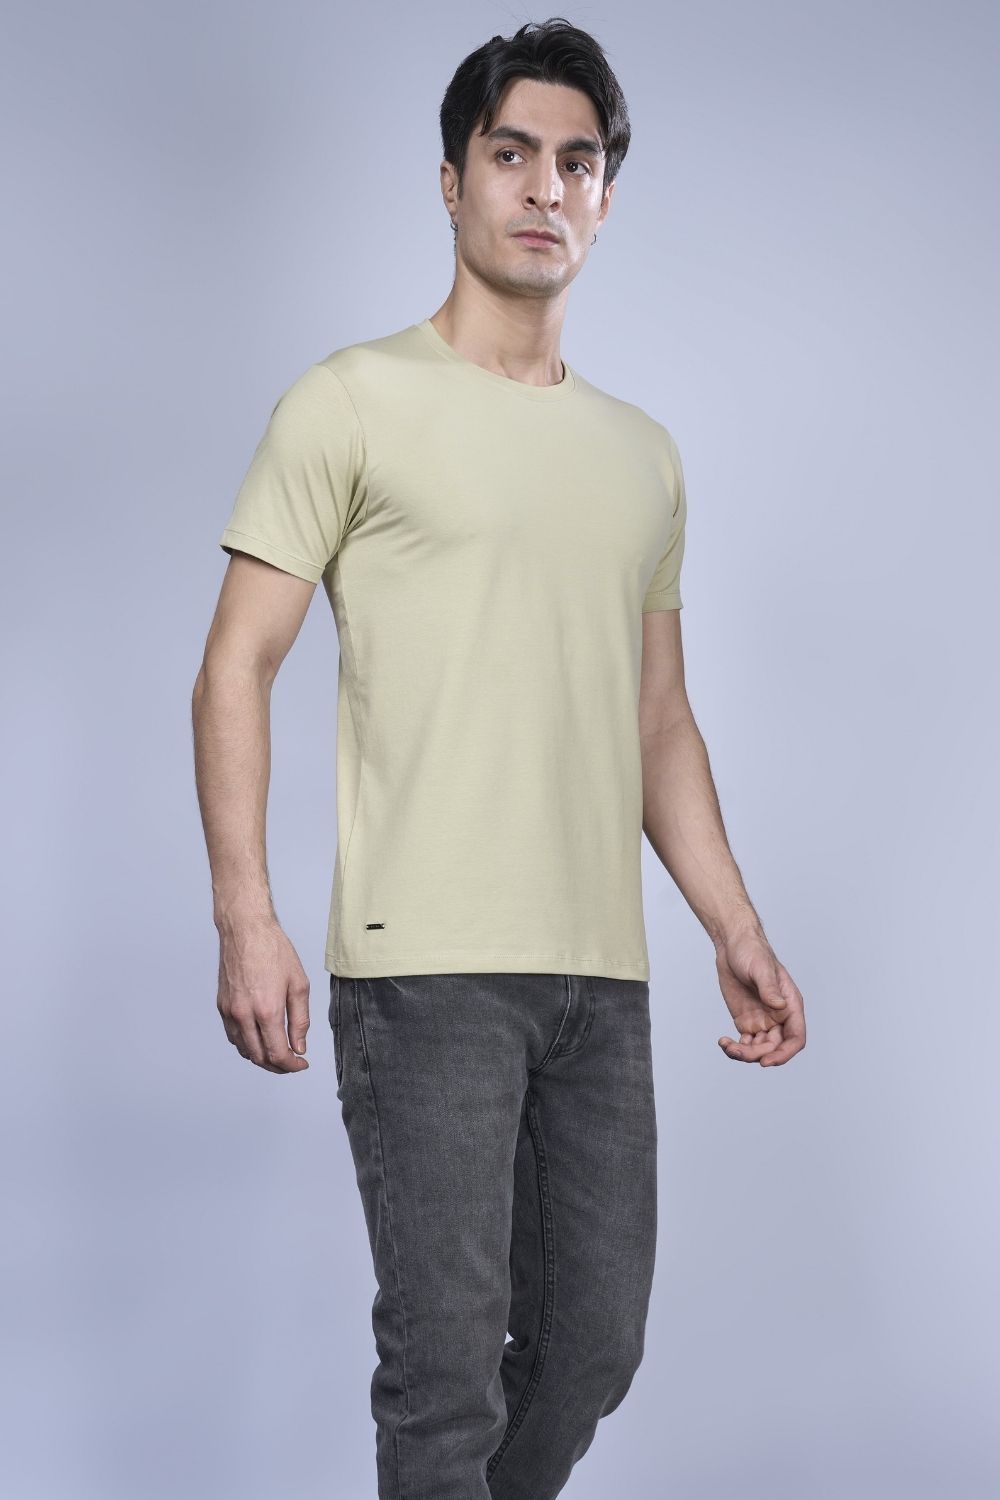 Cotton Stretch T shirt for men in the the solid color pale green with half sleeves and round neck, side view.